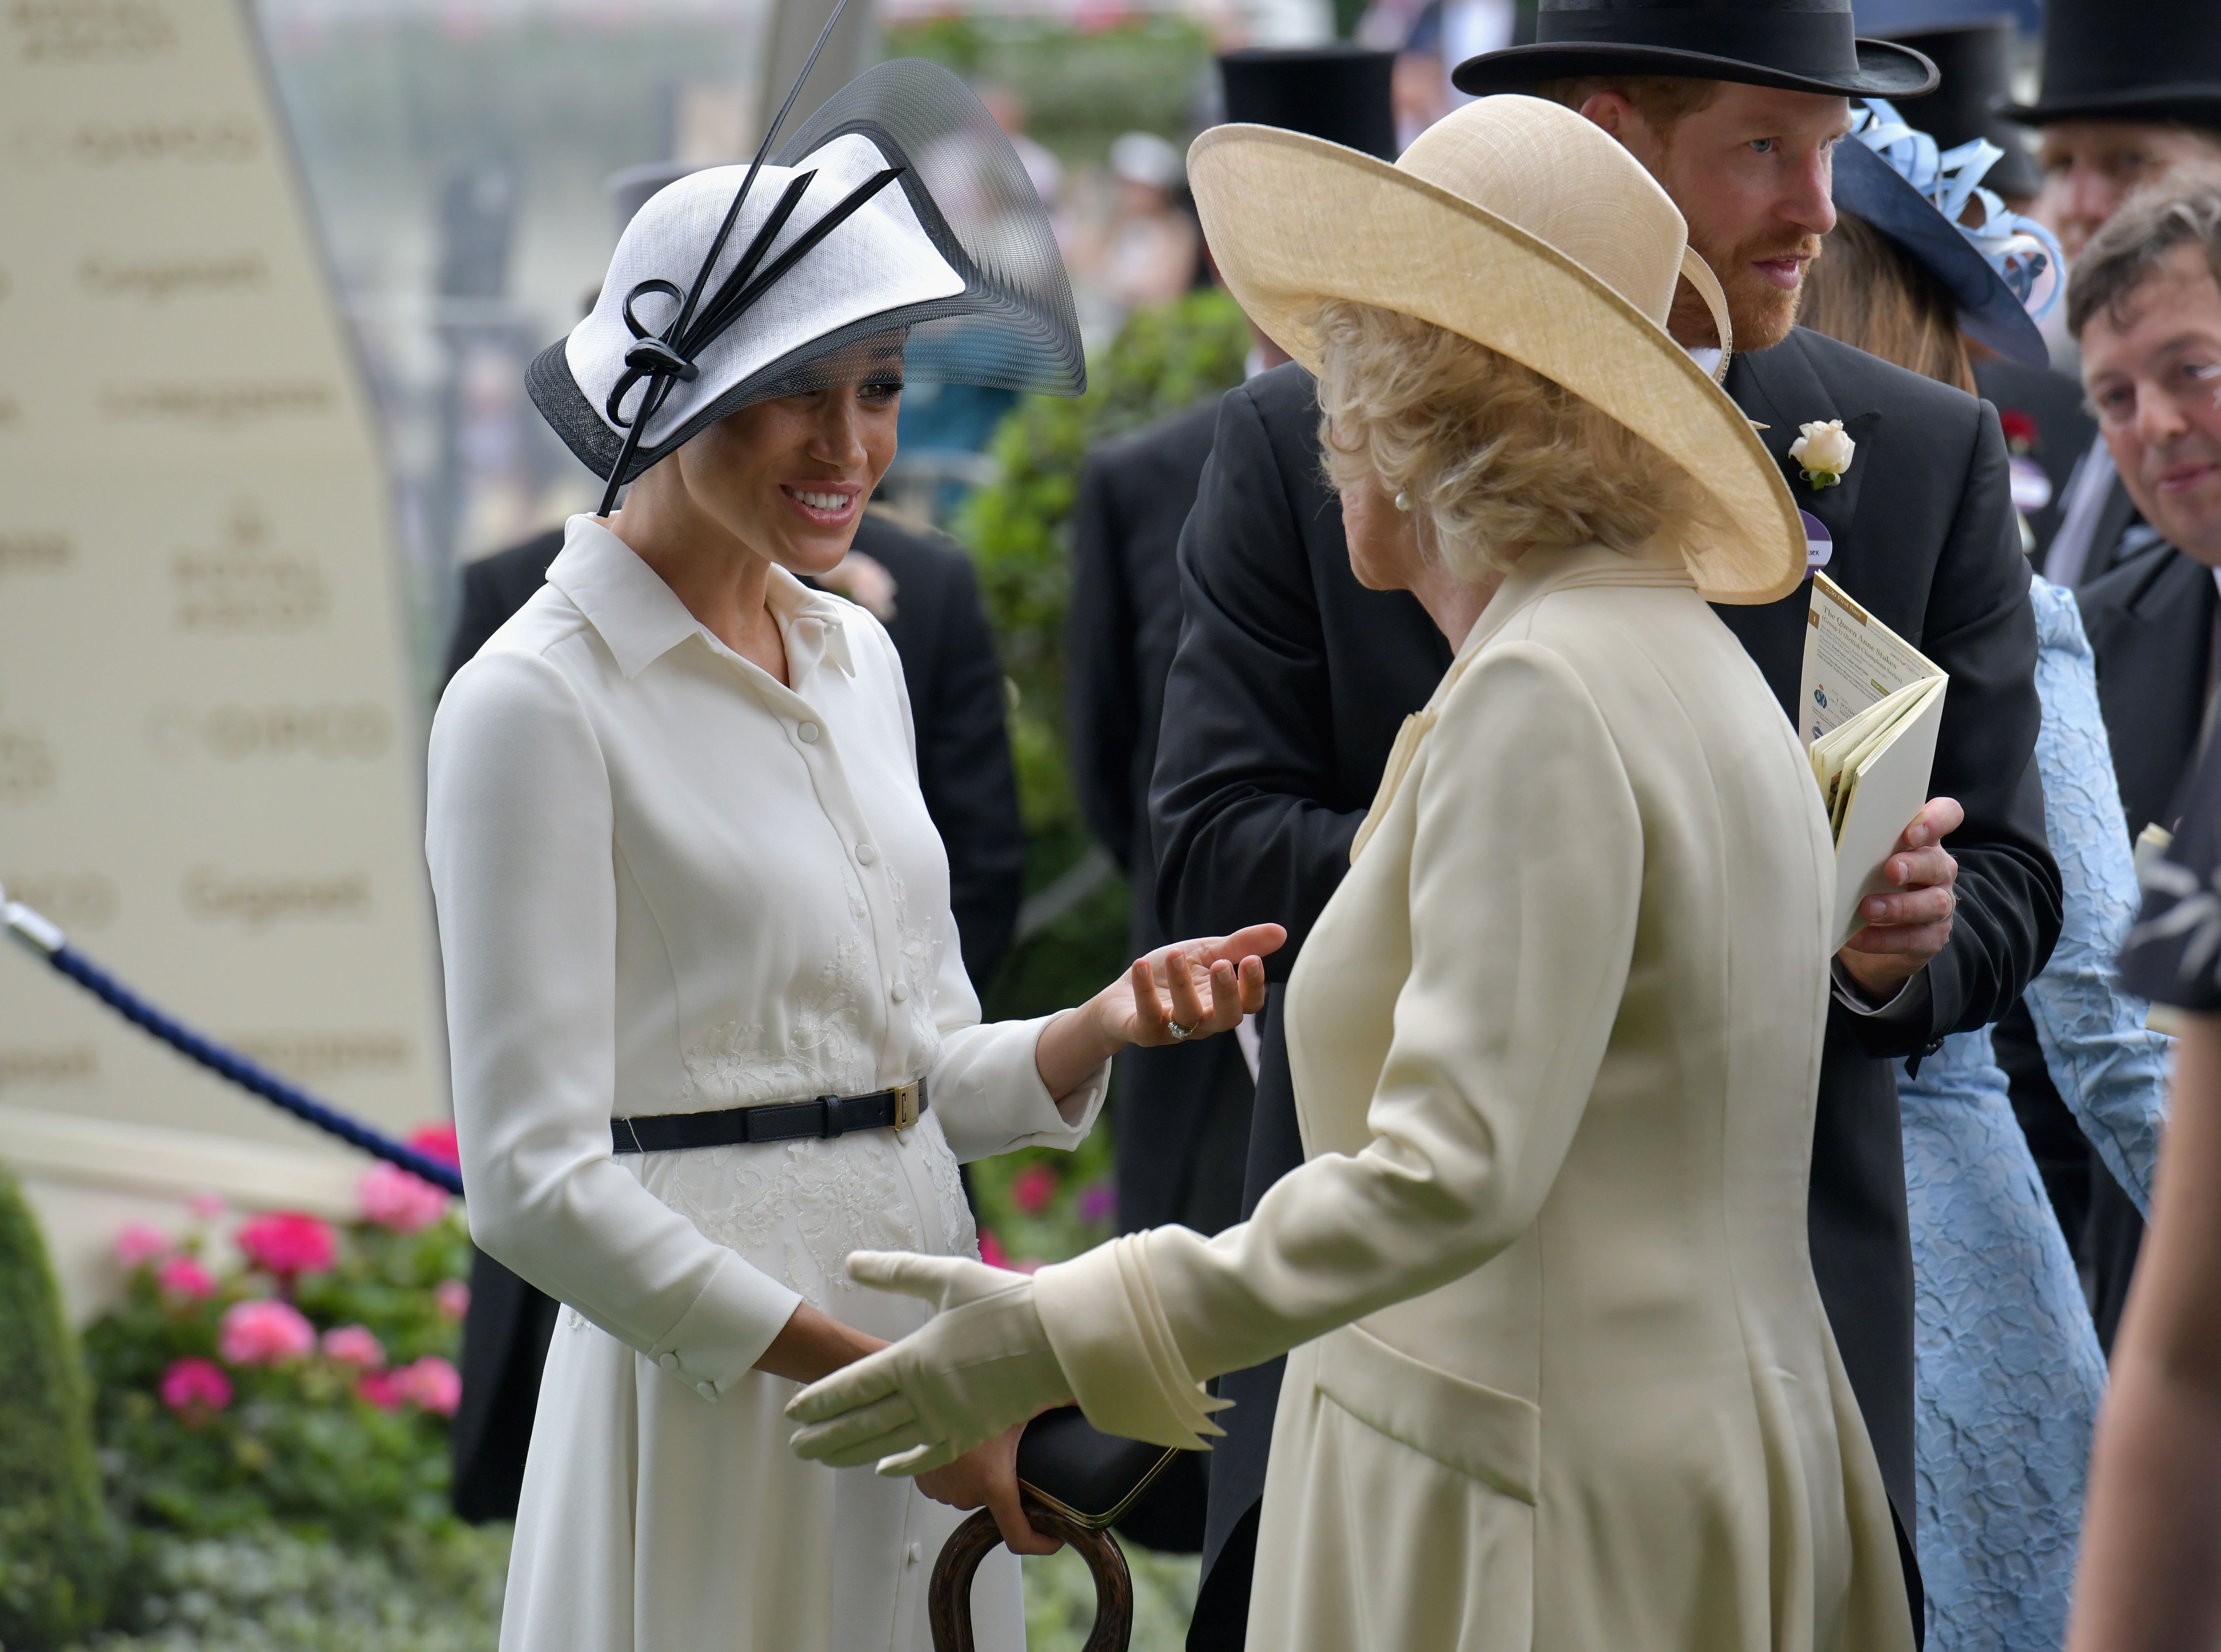 Duchess Meghan, Duchess Camilla, and Prince Harry at Royal Ascot Racecourse on June 19, 2018, in Ascot, England. | Source: Getty Images